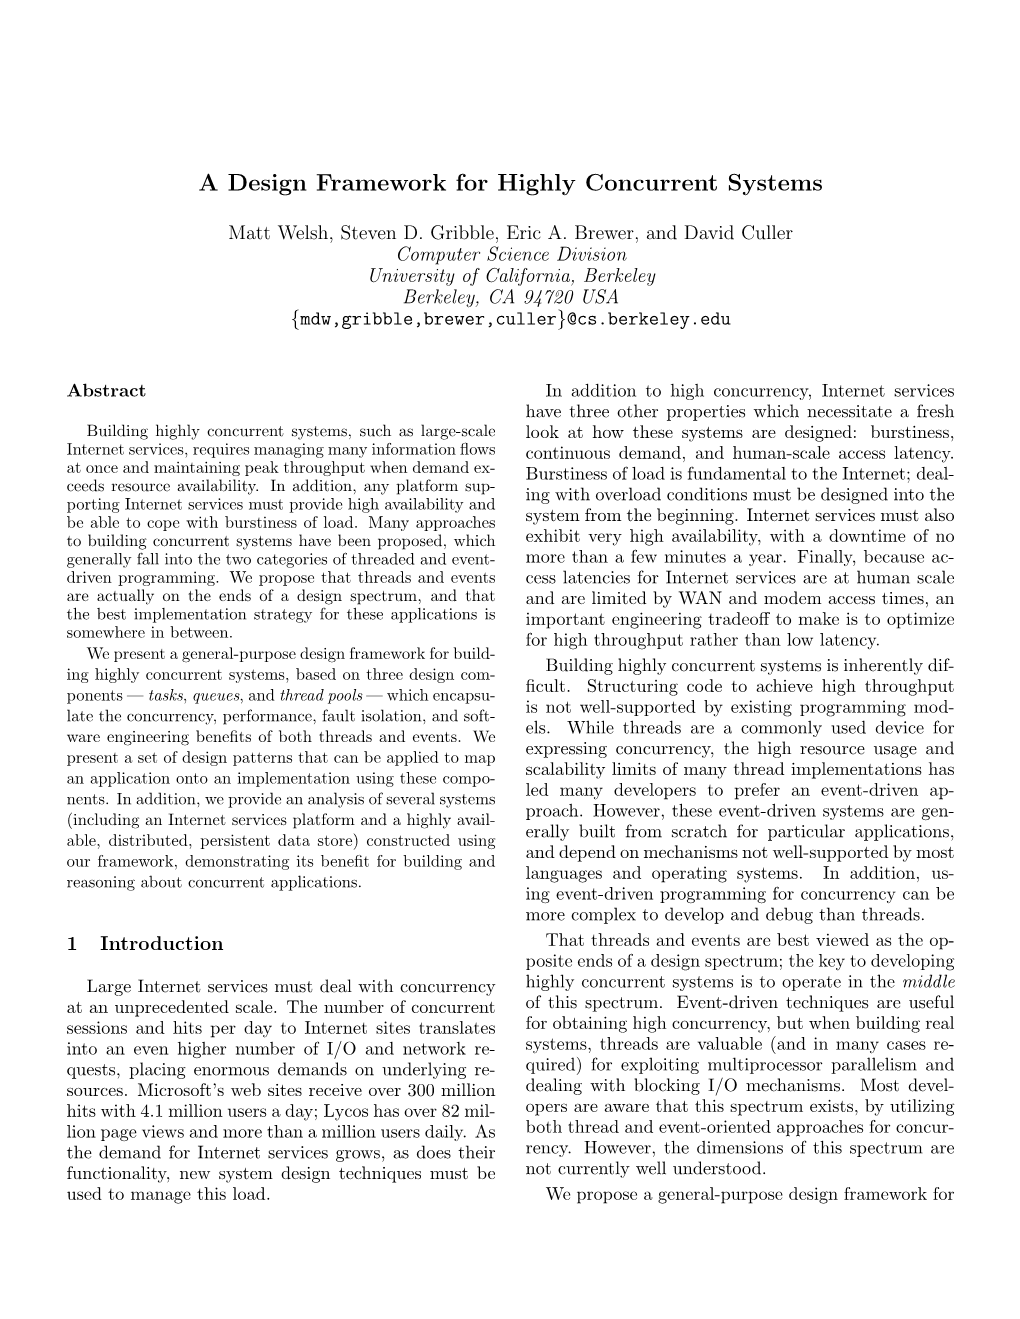 A Design Framework for Highly Concurrent Systems